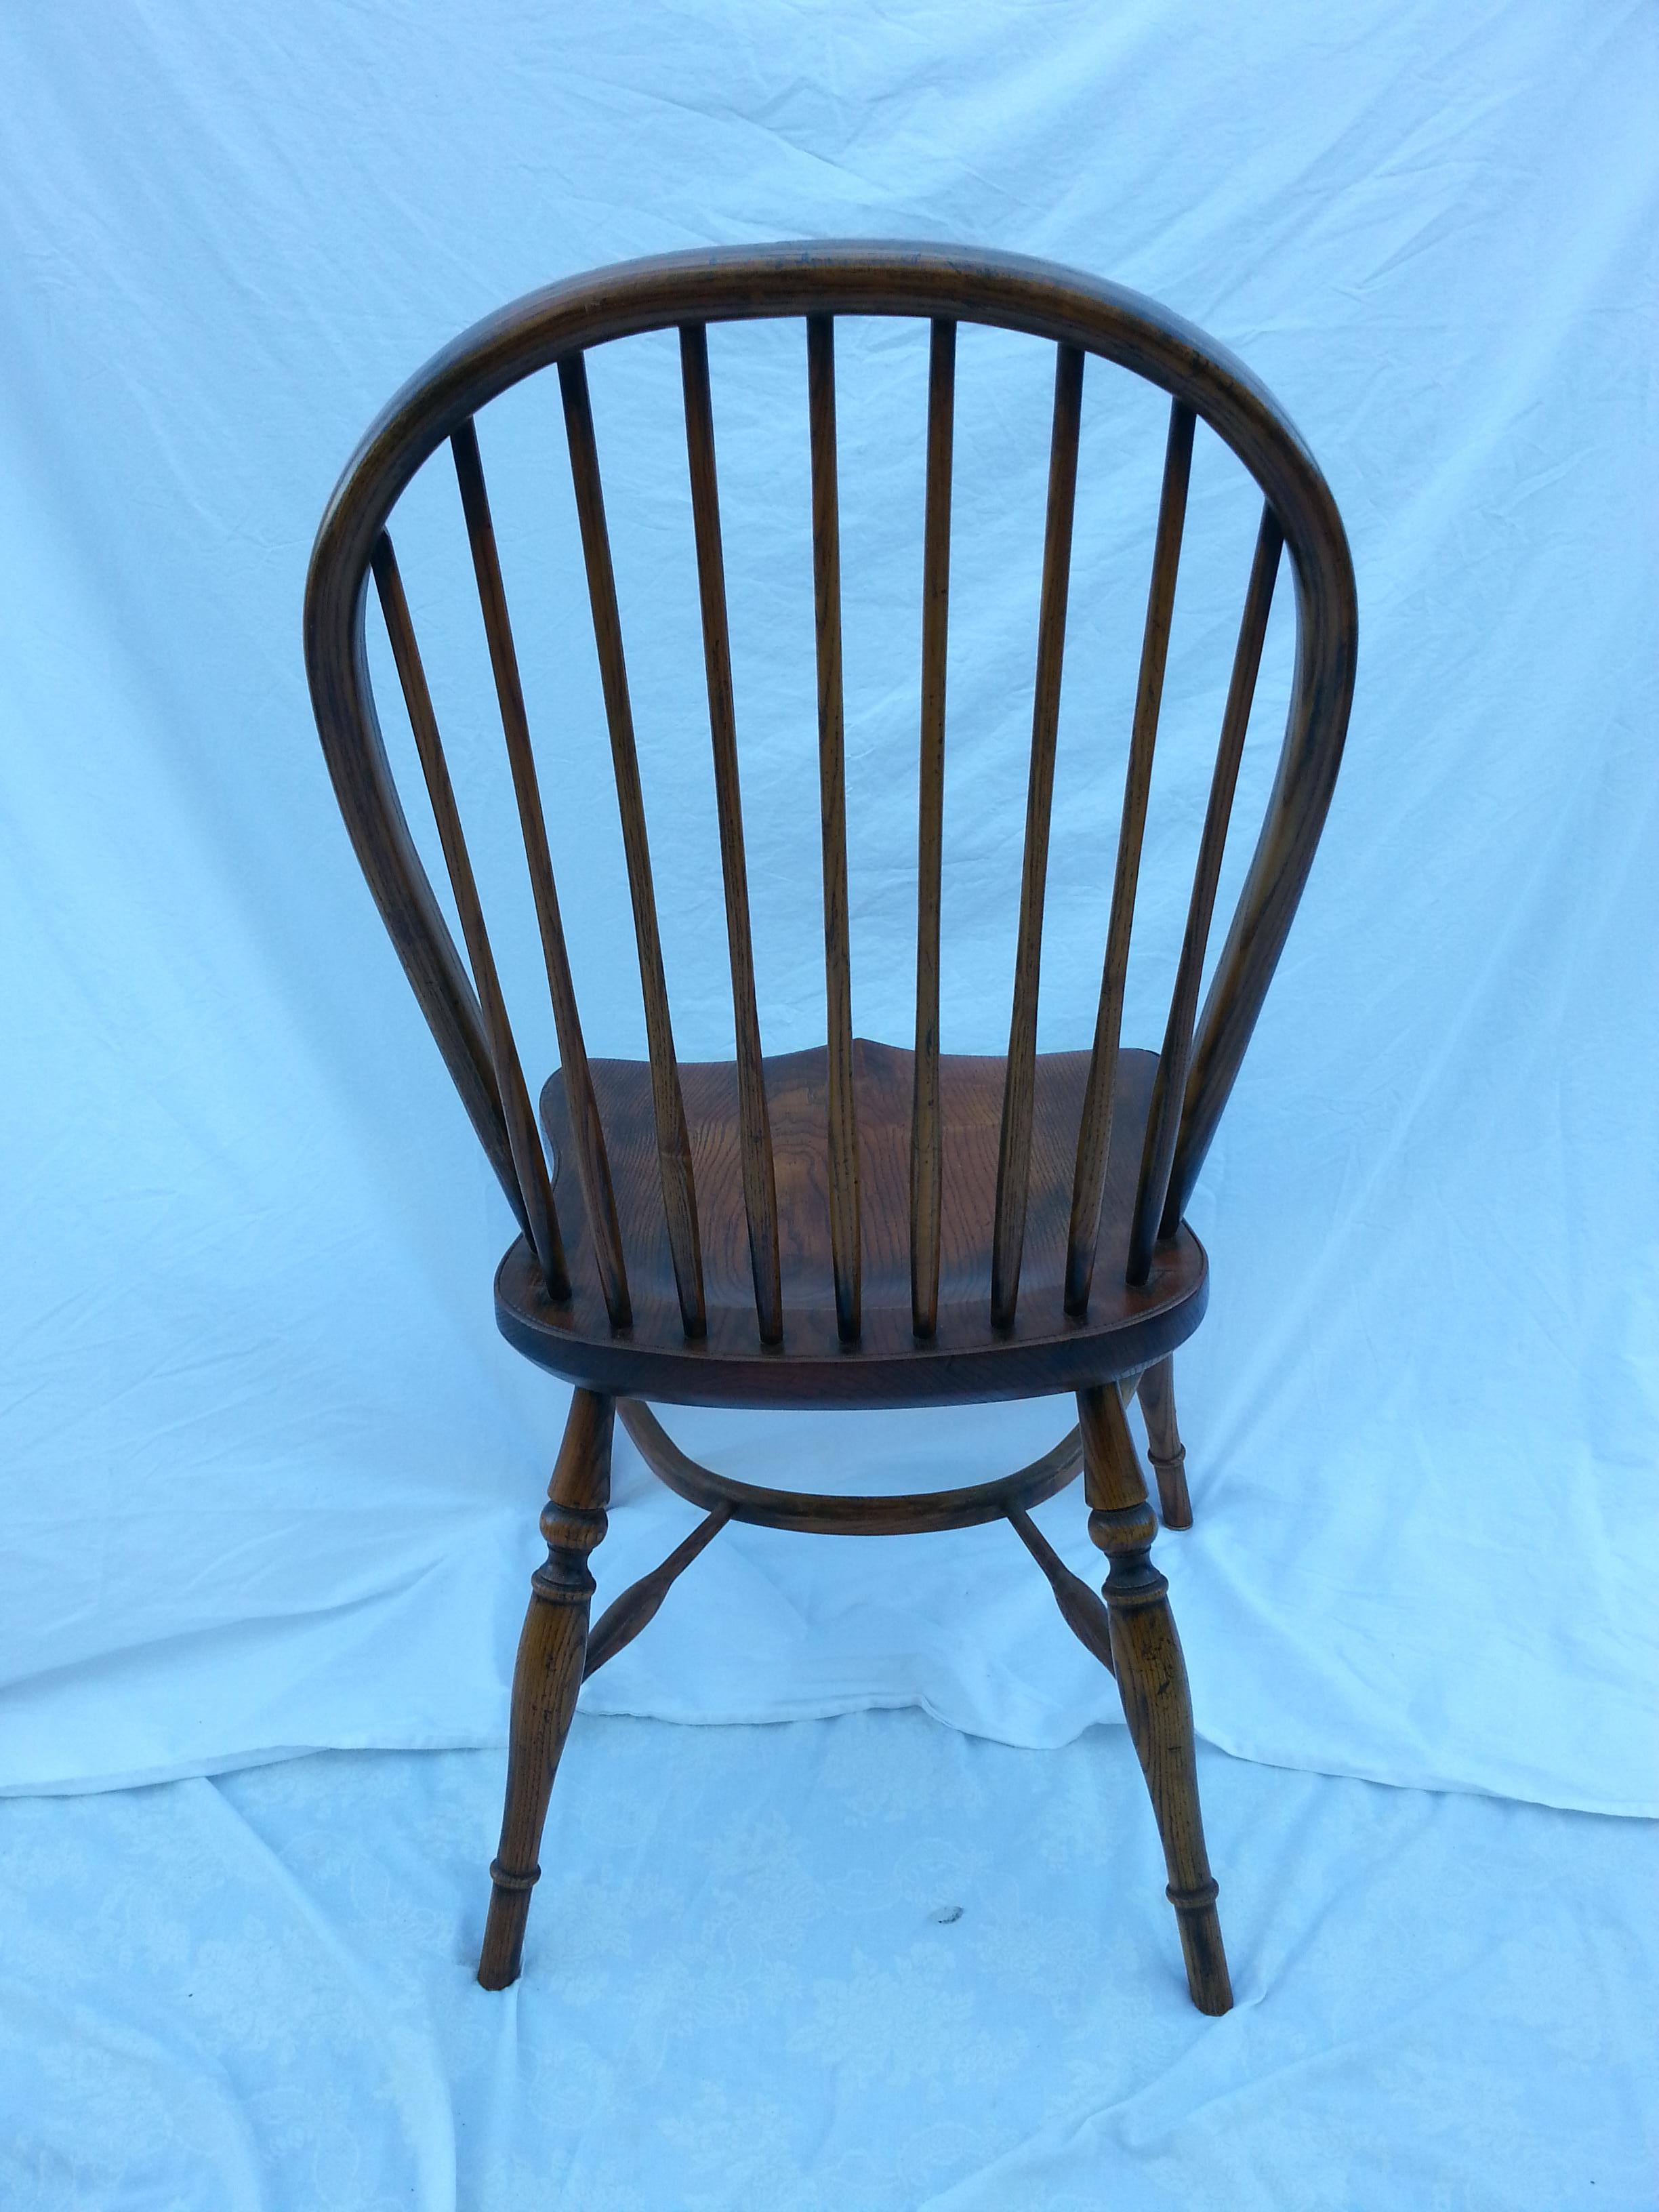 Reproduction spindle back oak stained side chair.